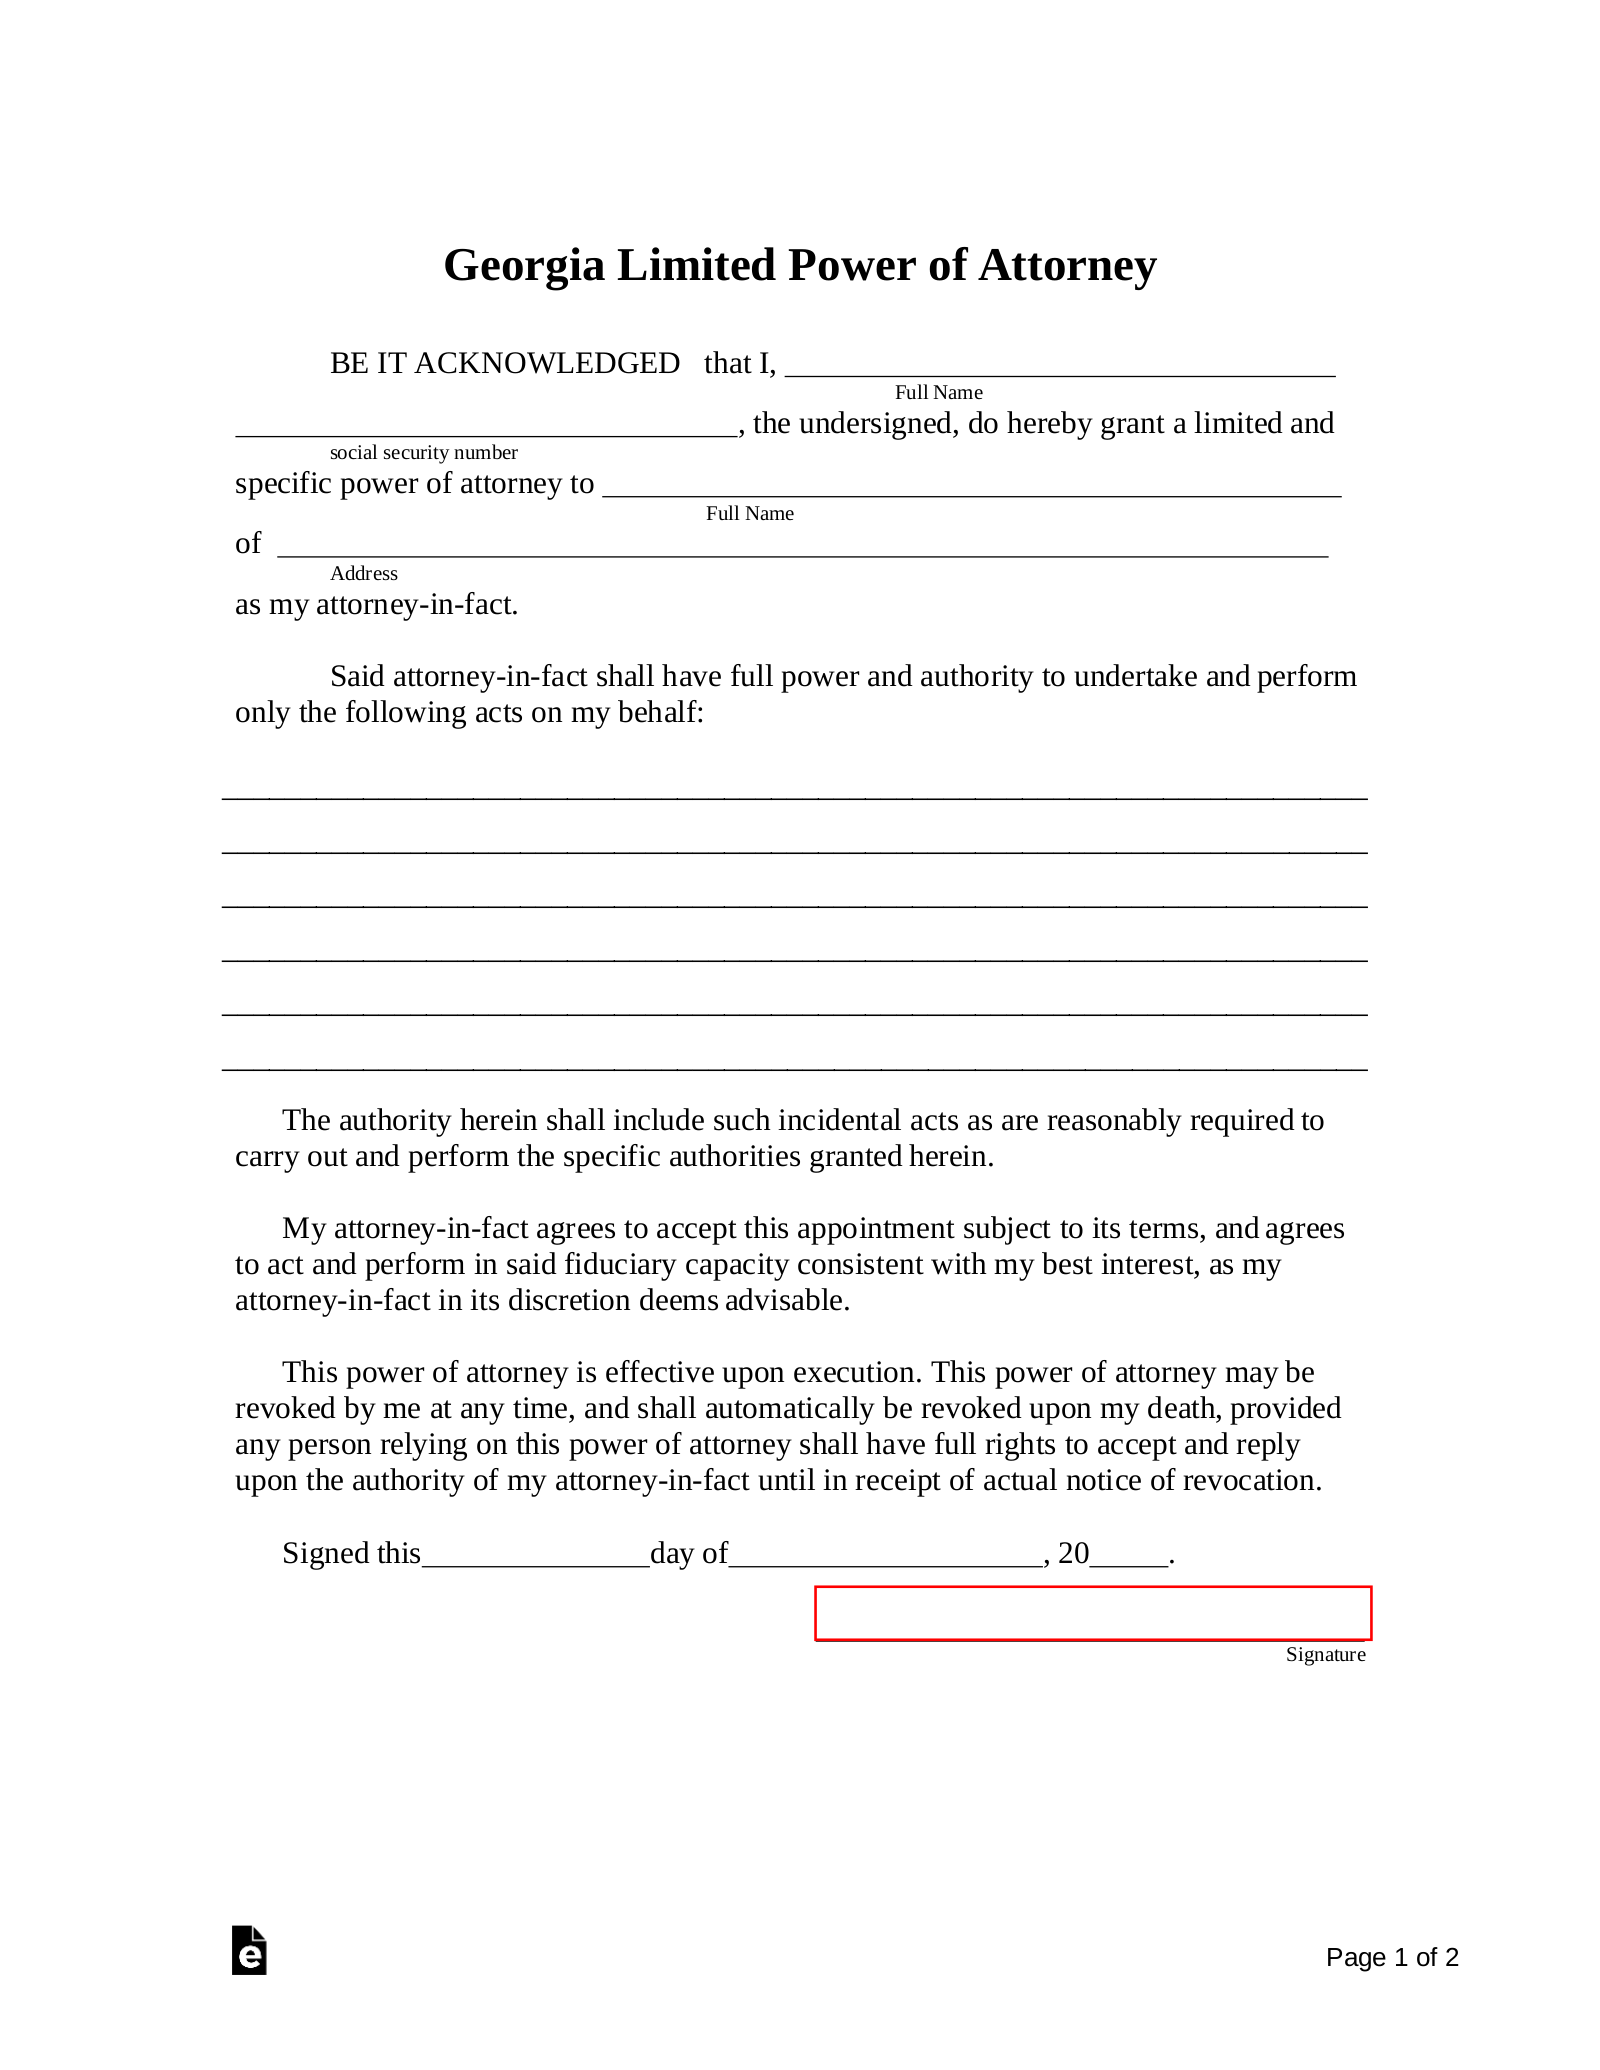 How to Obtain Durable Power of Attorney in Georgia